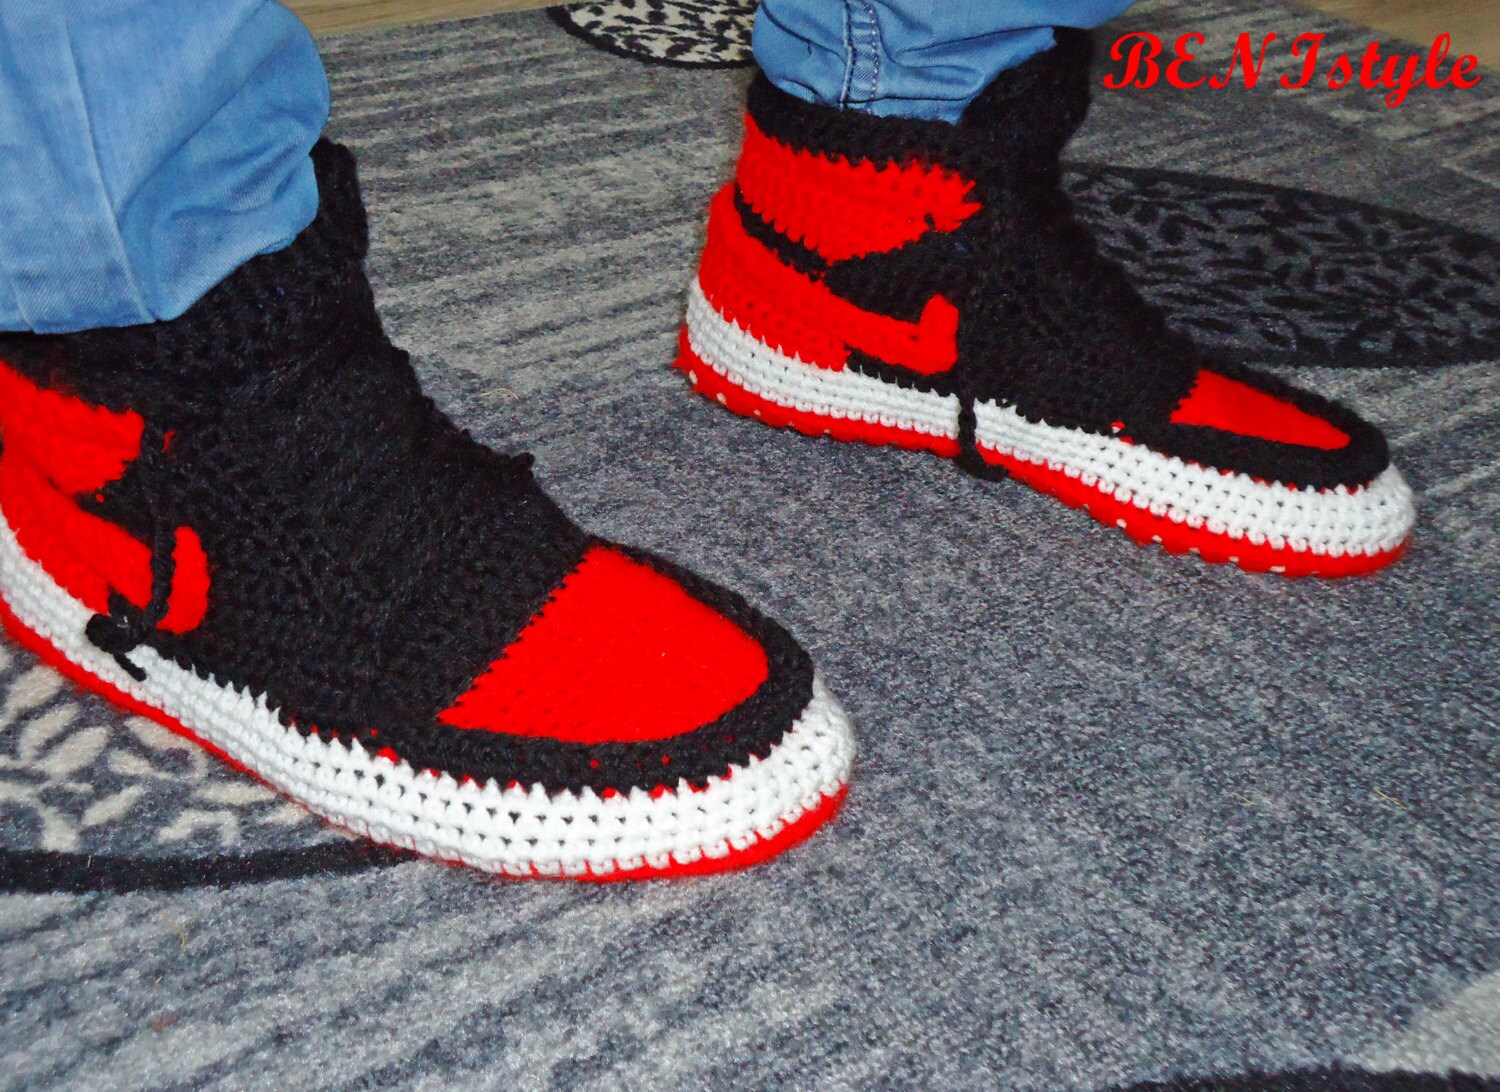 Bred Shoes Crochet Converse Slippers 